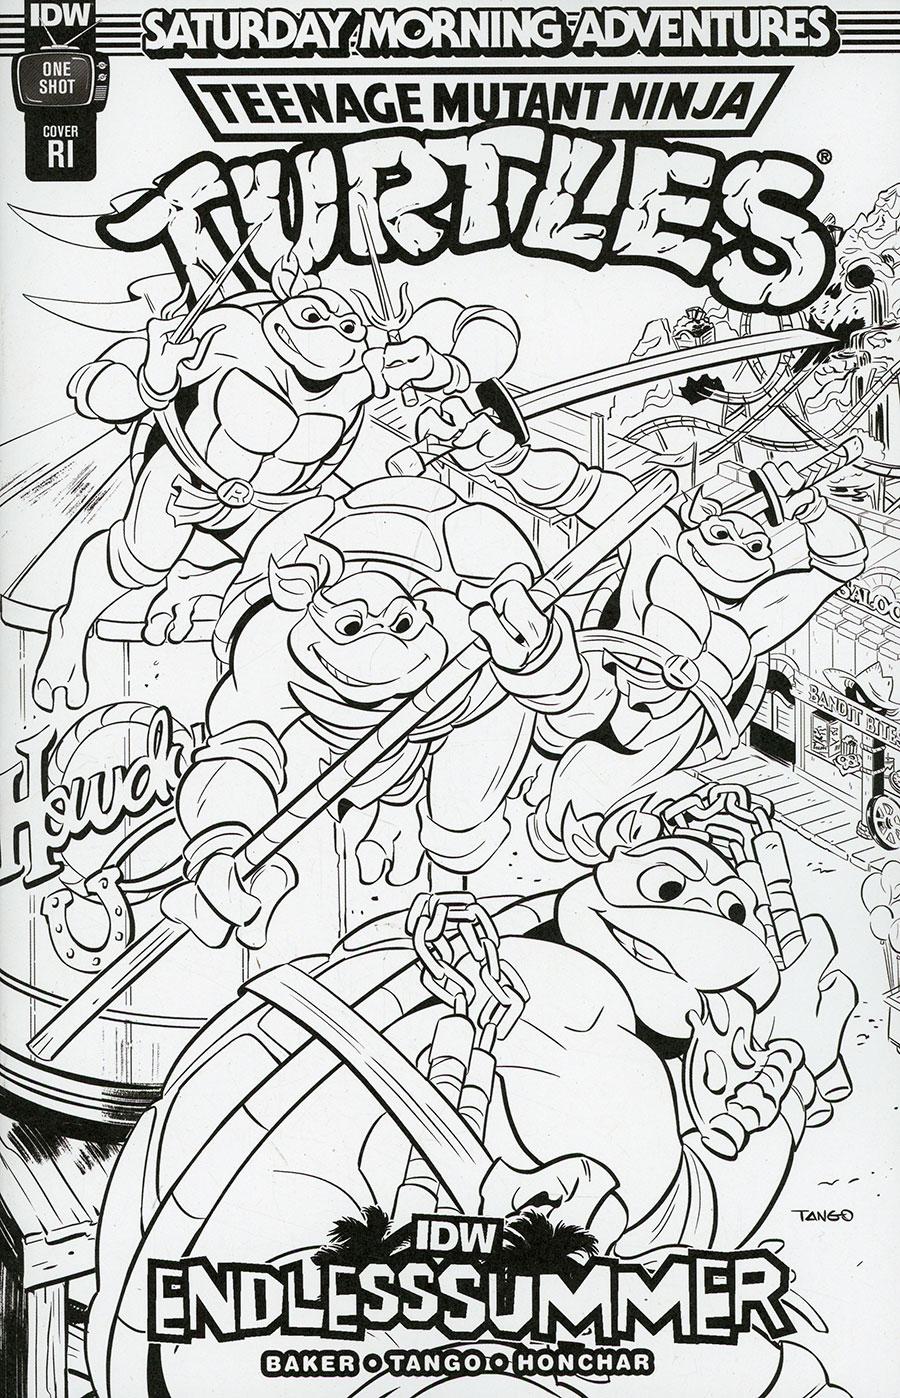 IDW Endless Summer Teenage Mutant Ninja Turtles Saturday Morning Adventures #1 (One Shot) Cover C Incentive Tango Coloring Book Variant Cover